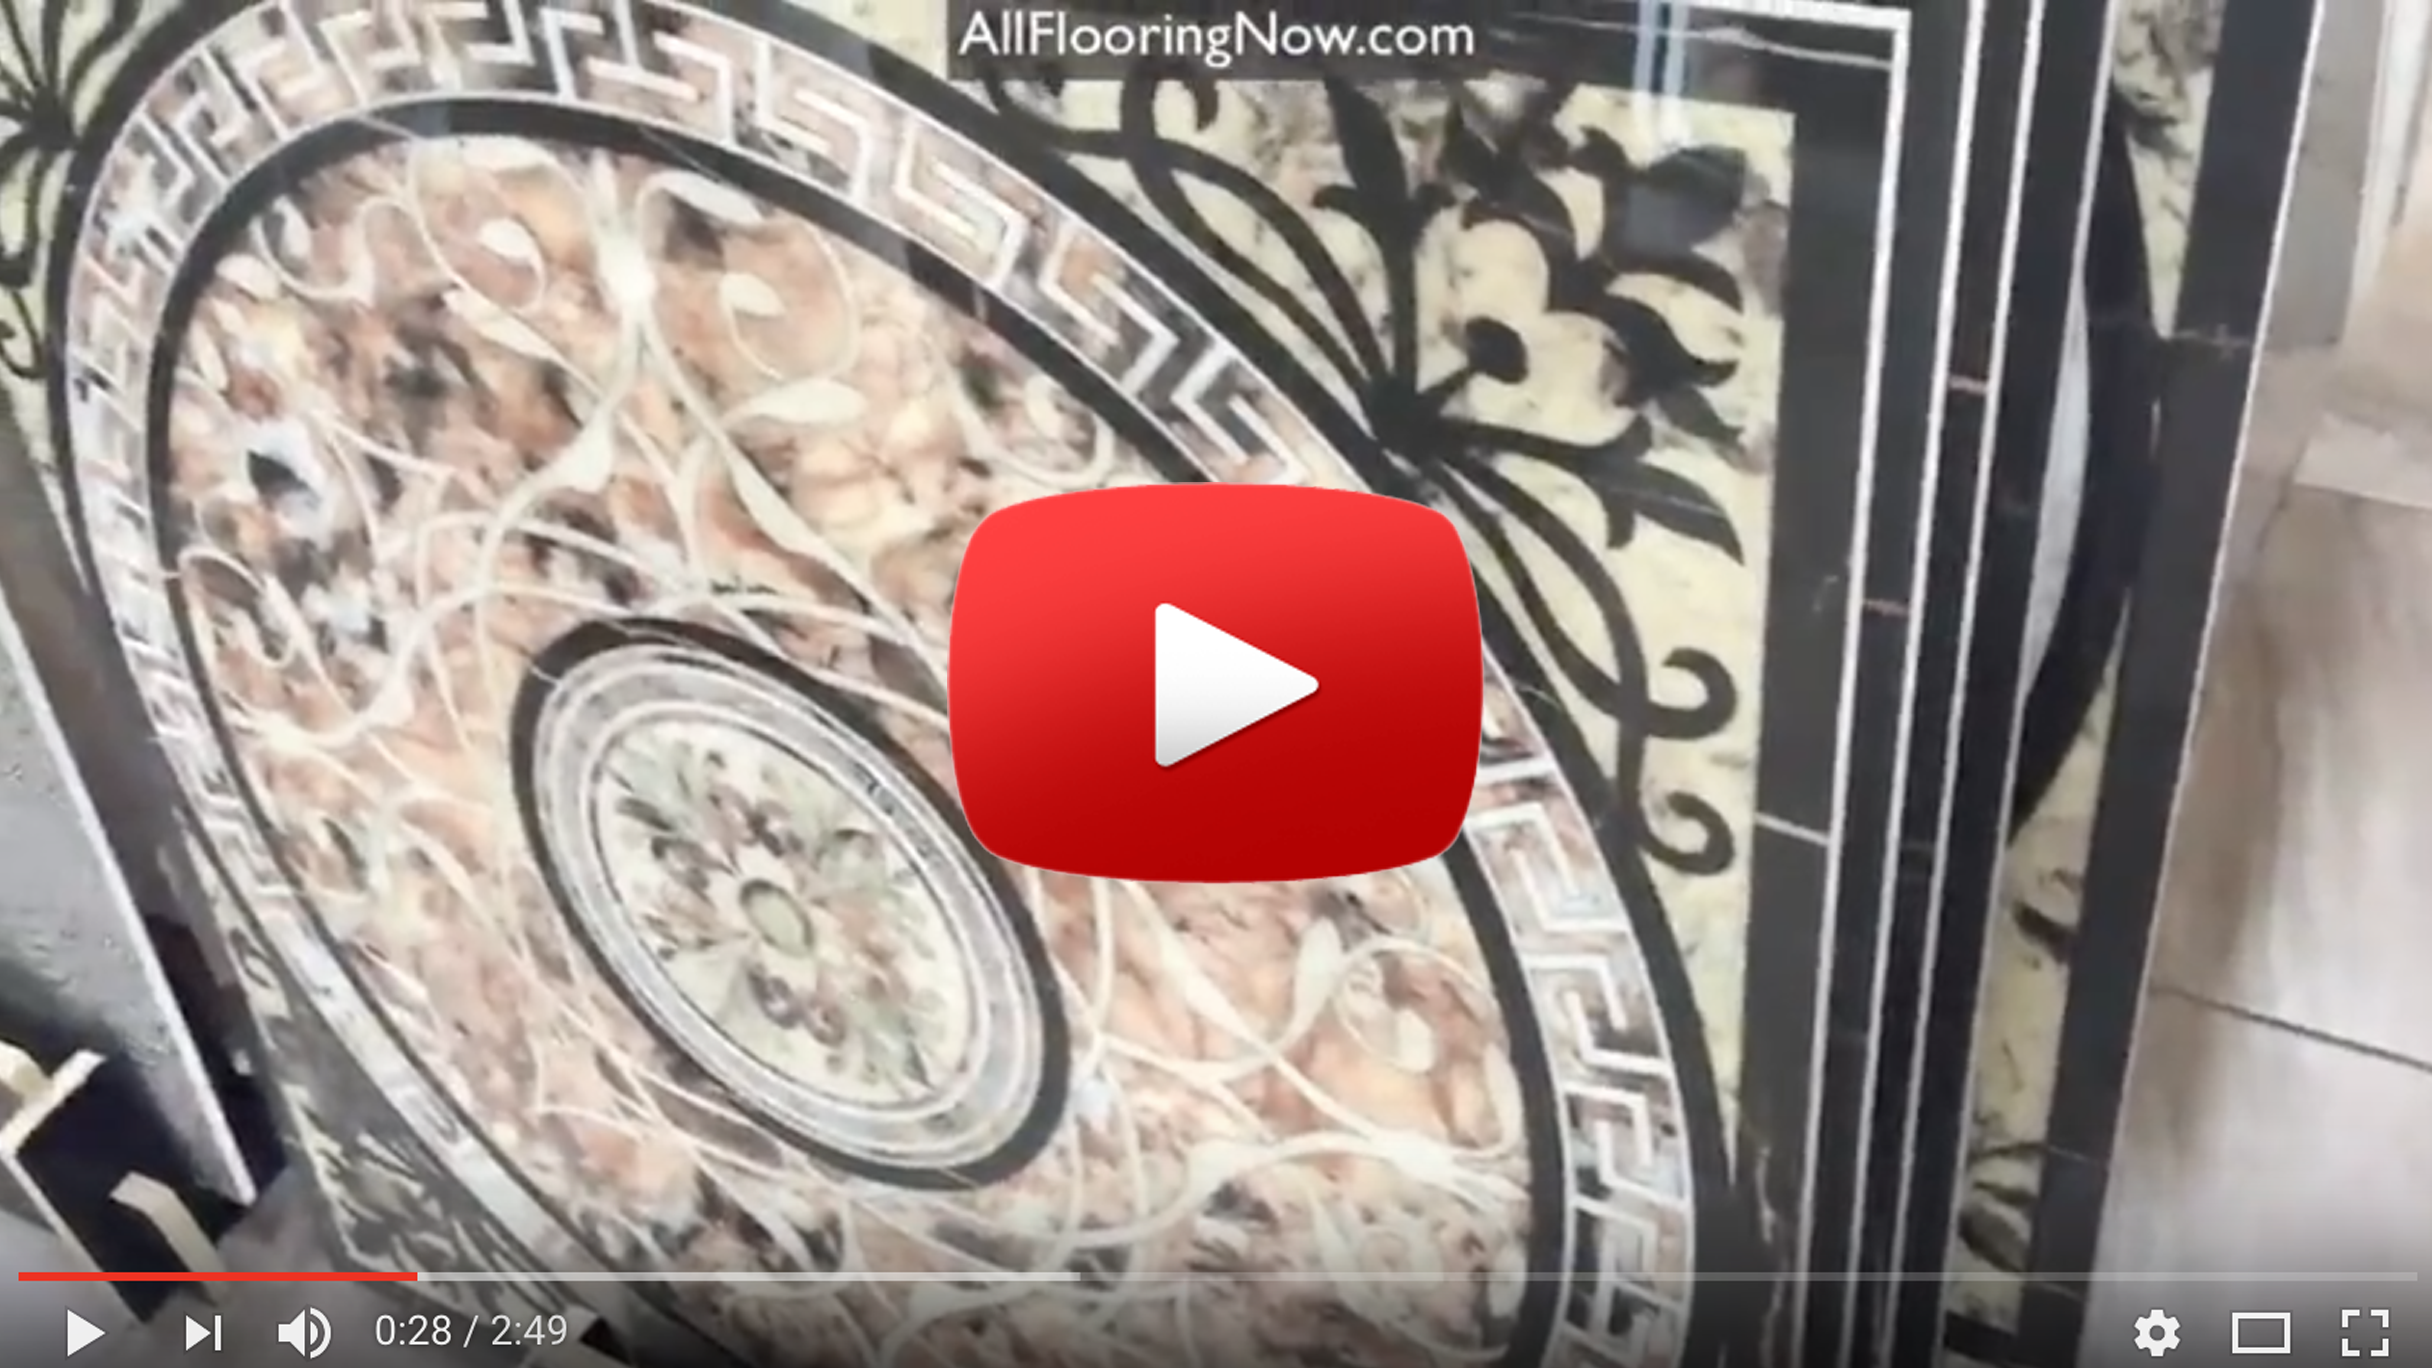 View The Decorative Tiles Video